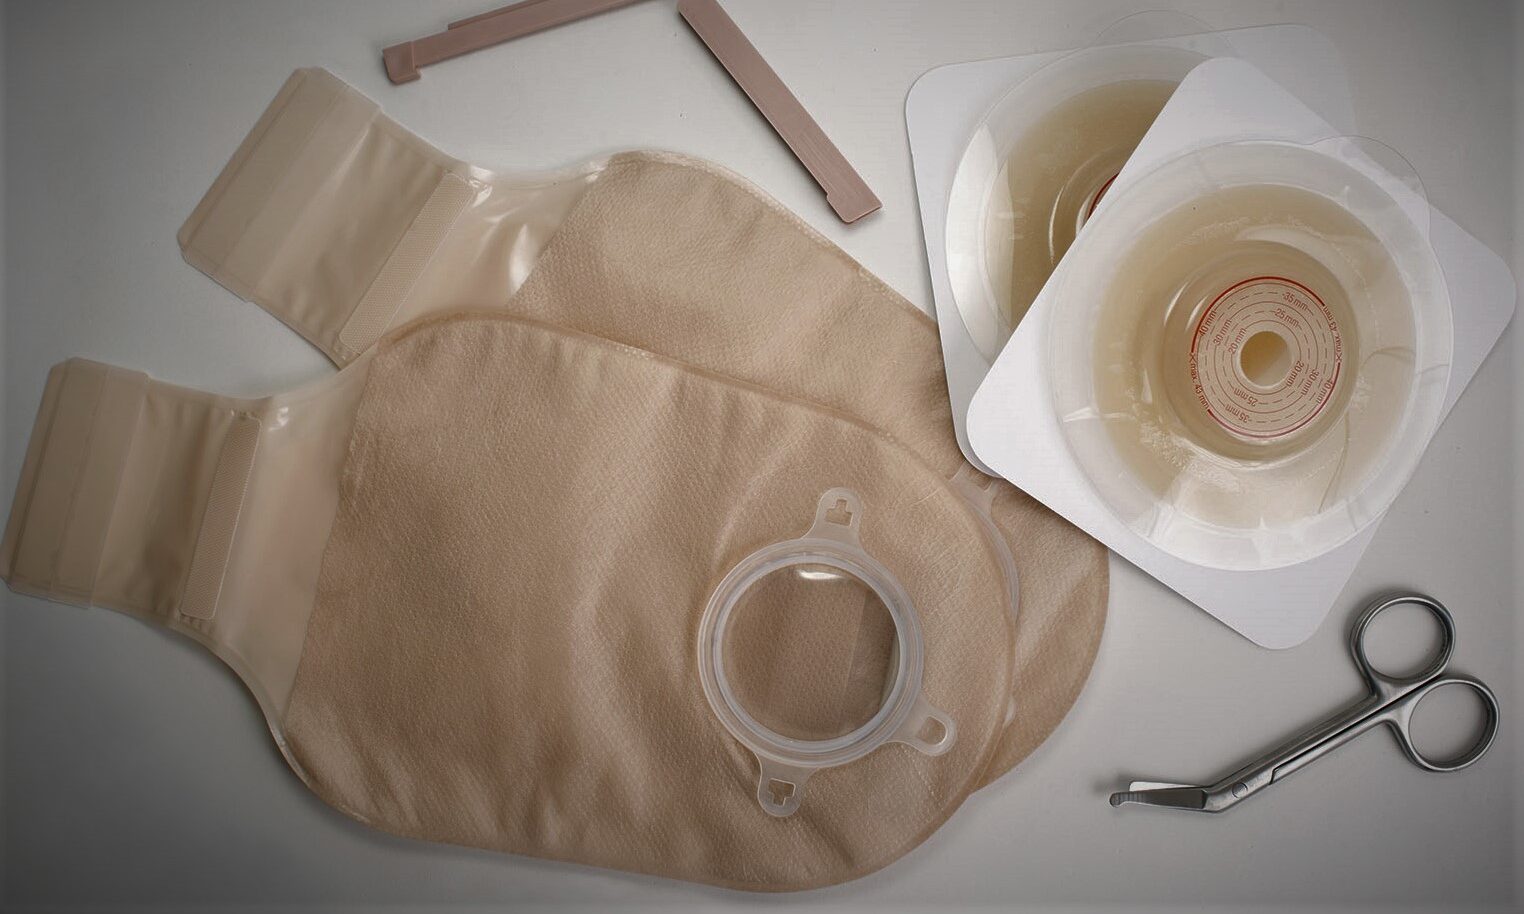 Ostomy Devices Market Size, Share, Trends, Growth & Applications 2026